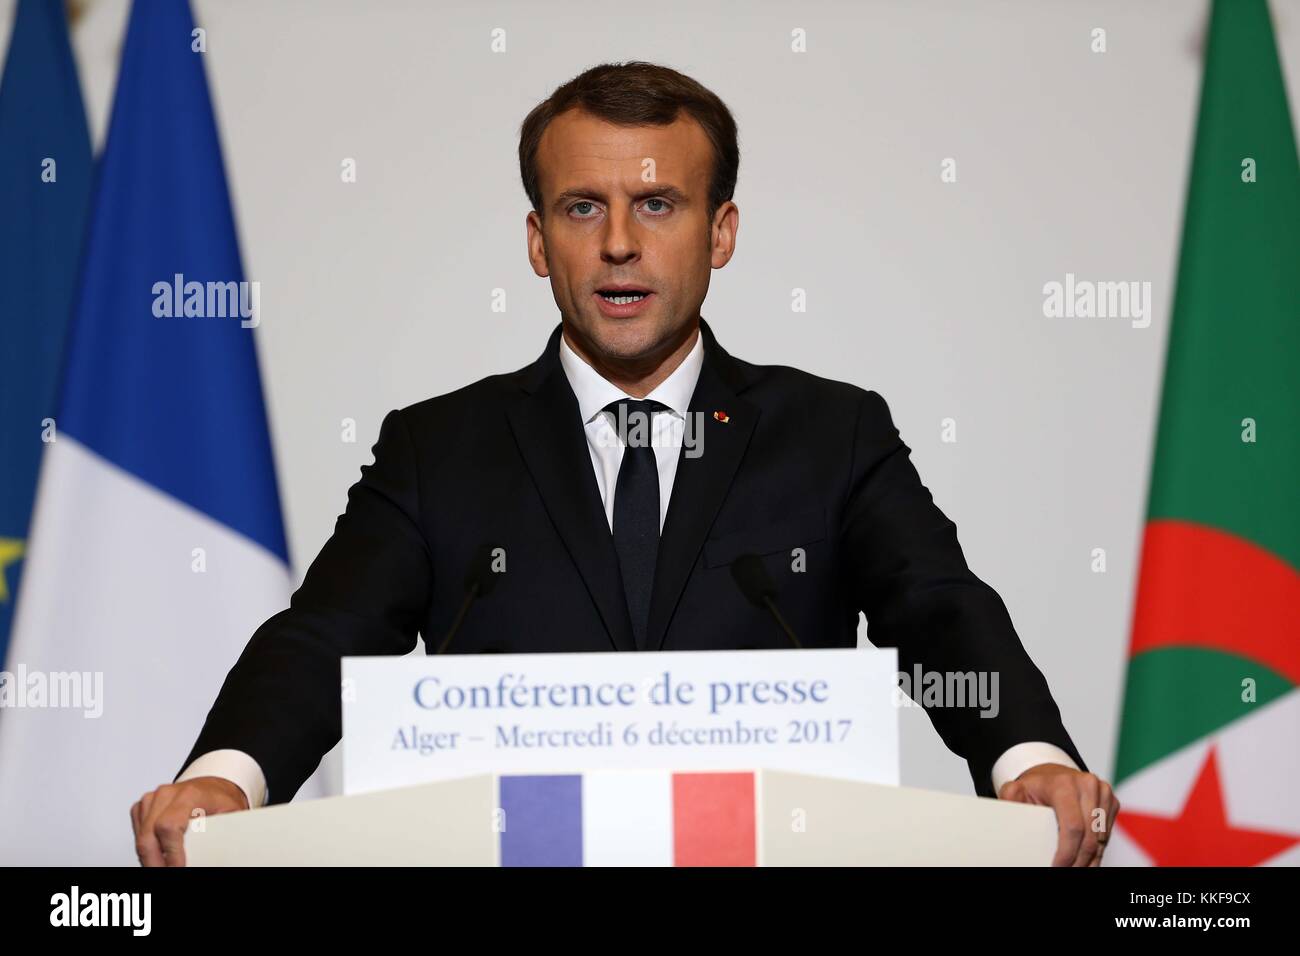 Algiers. 6th Dec, 2017. Visiting French President Emmanuel Macron addresses a news conference in Algiers, Algeria, on Dec. 6, 2017. Visiting French President Emmanuel Macron said Wednesday that France does not support U.S. President Donald Trump's 'unilateral' decision to recognize Jerusalem as the capital of Israel. 'The decision is unilateral and regrettable, and France does not support it,' Macron told a news conference in Algiers after his one-day visit to the North African nation. Credit: Xinhua/Alamy Live News Stock Photo